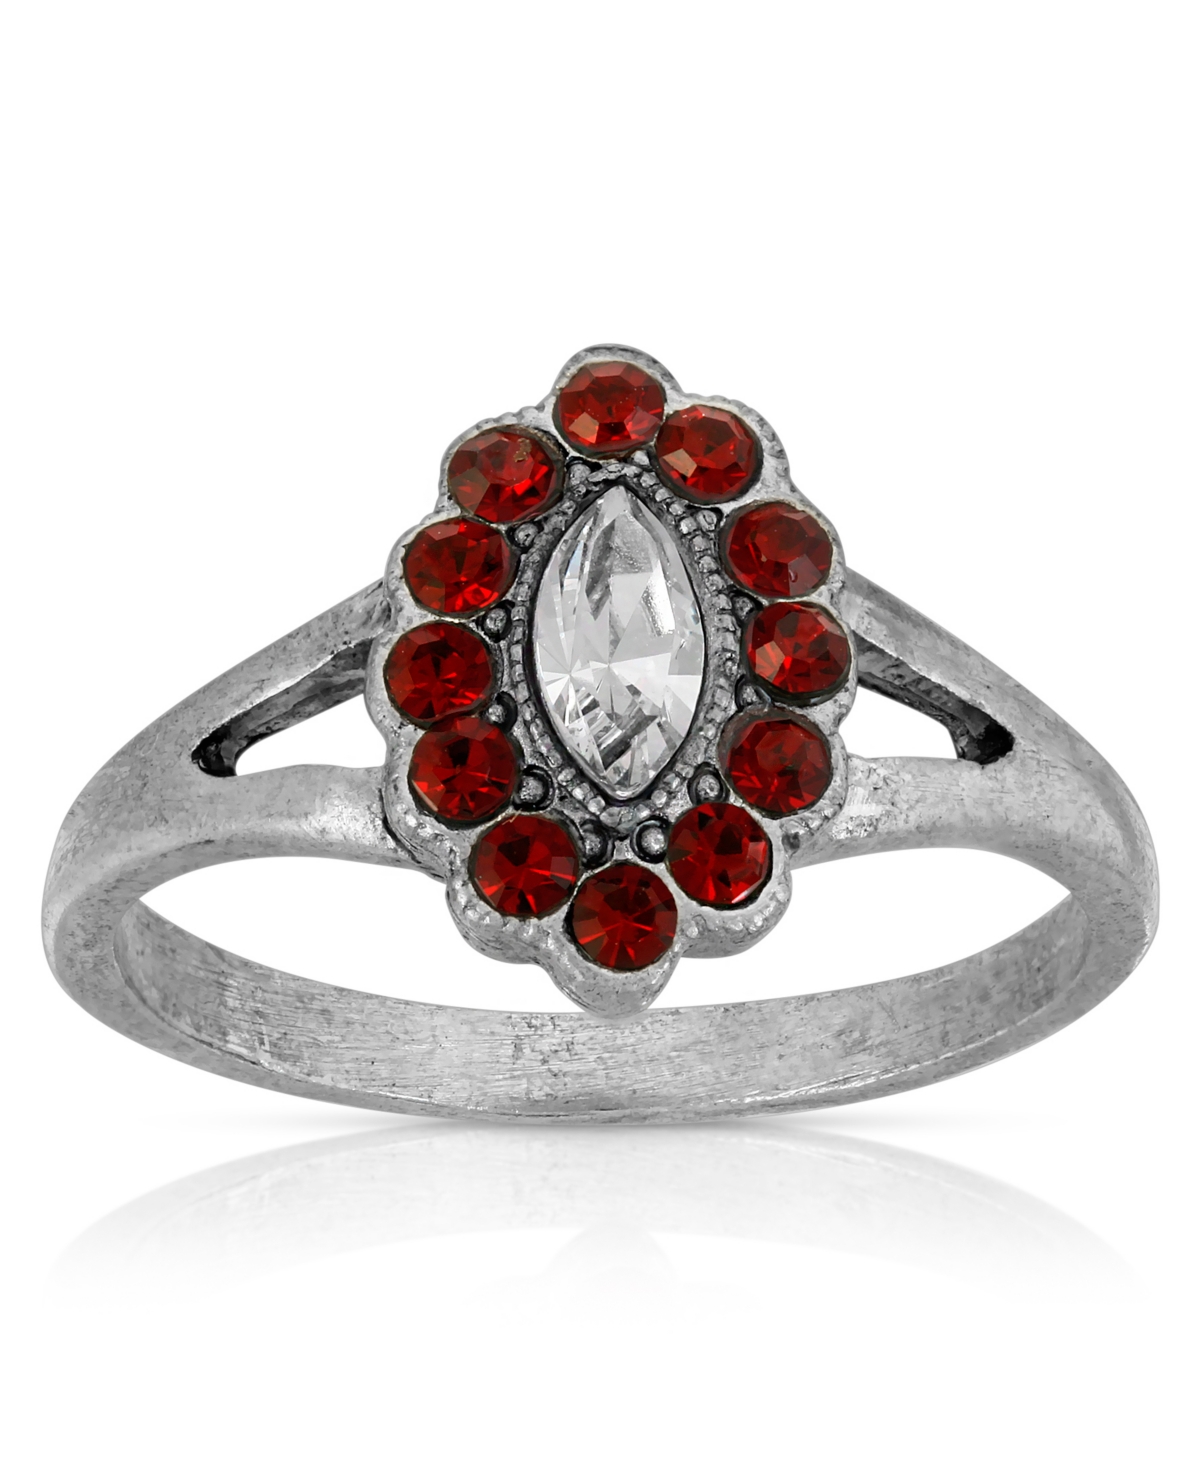 2028 Pewter Diamond Shaped Crystal Ring In Red